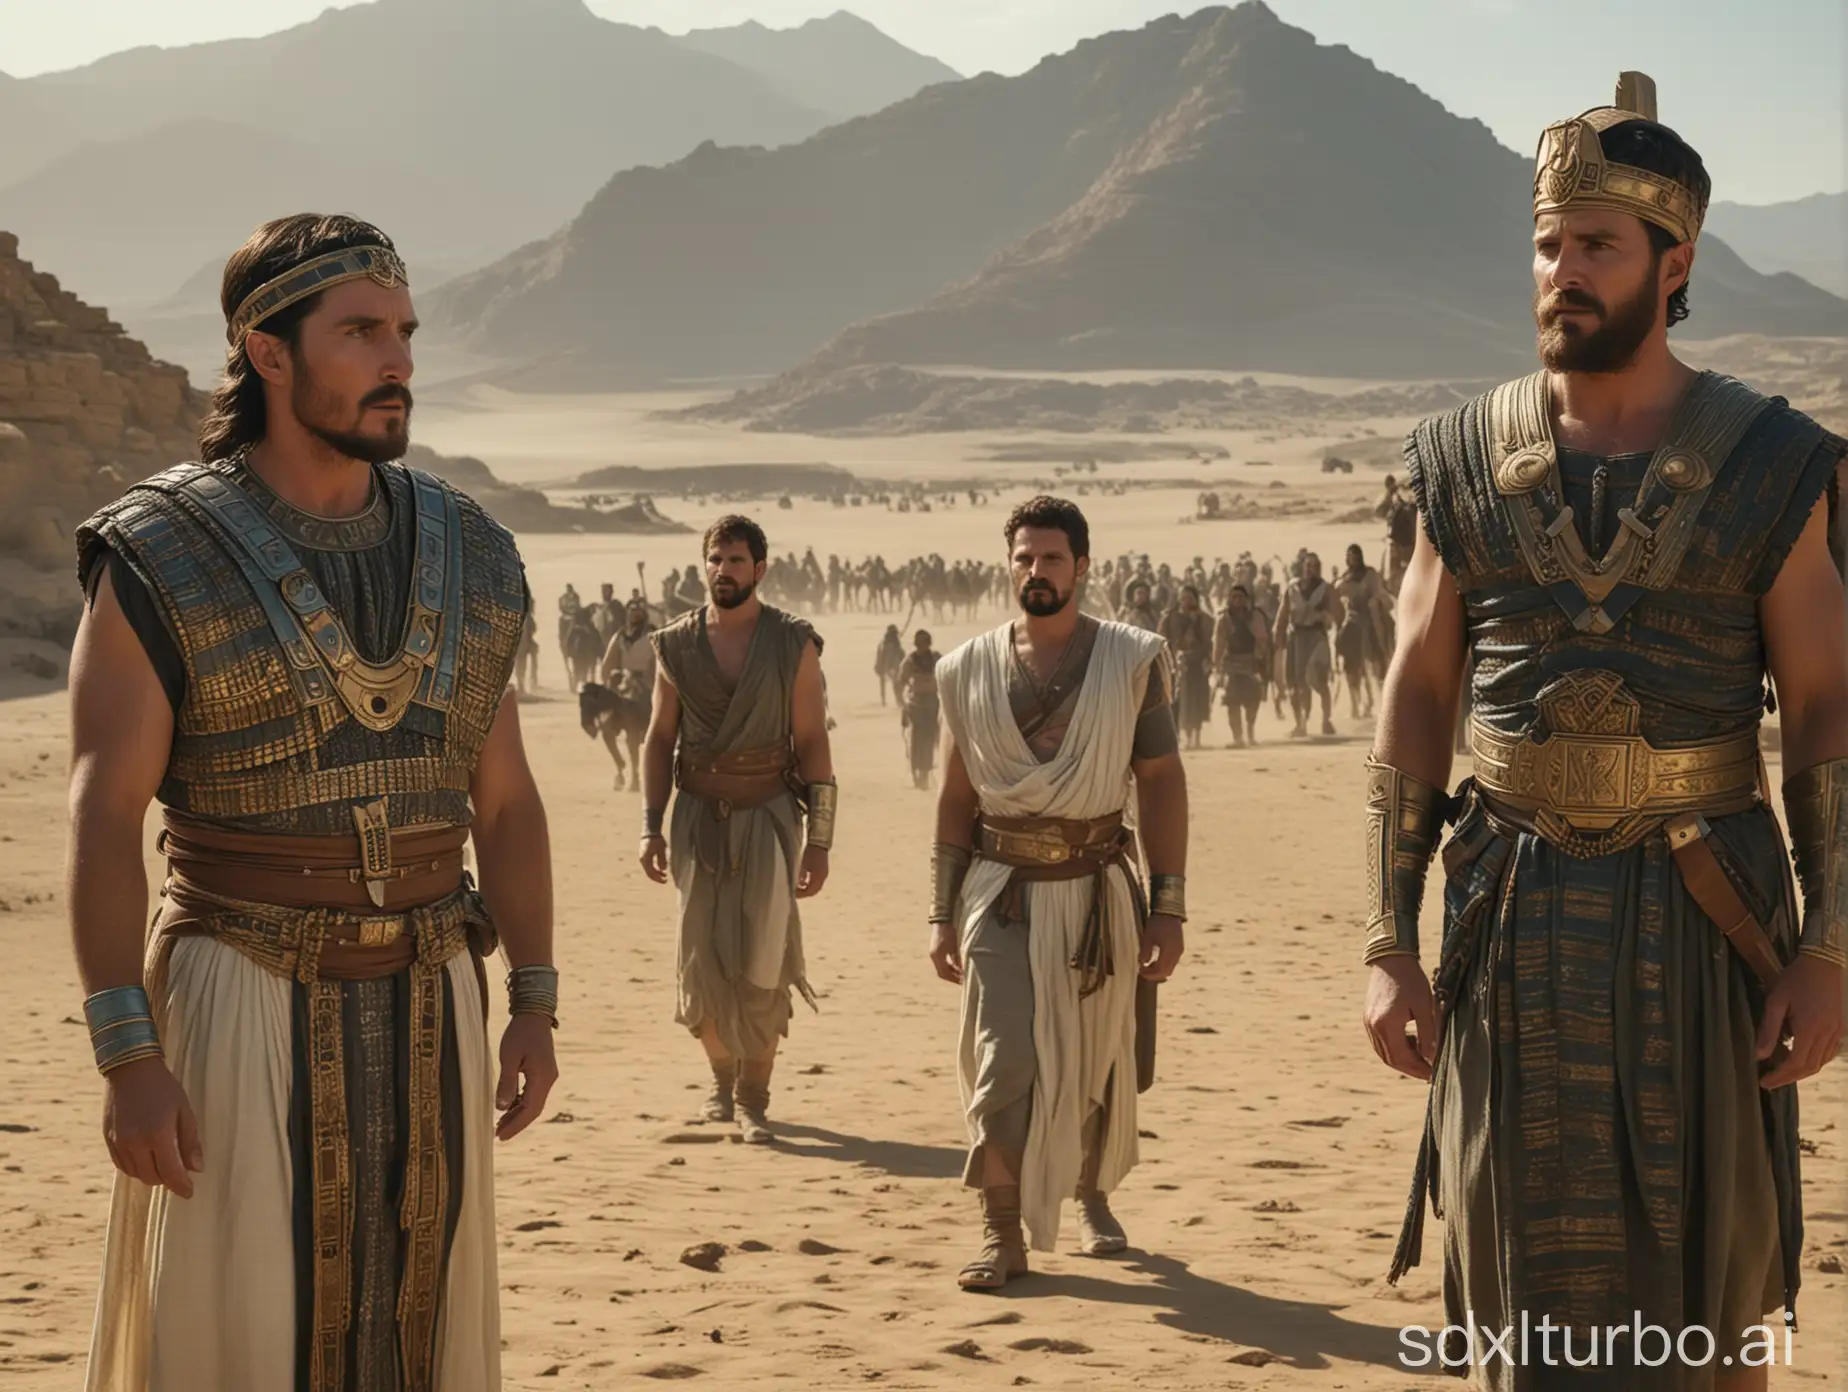 In this image, we see a scene from the movie "Exodus: Gods and Kings" featuring actors Christian Bale as Moses and Joel Edgerton as Ramses. They are standing amidst a desert landscape with other characters in the background. Both men are dressed in period costumes that reflect their roles as leaders of ancient Egypt. Their expressions convey a sense of tension and intensity, indicative of the historical drama unfolding in the film. Cinematic lighting, Unreal Engine 5, Cinematic, Color Grading, Editorial Photography, Photography, Photoshoot, Shot on 70mm lense, Depth of Field, DOF, Tilt Blur, Shutter Speed 1/1000, F/22, White Balance, 32k, Super-Resolution, Megapixel, ProPhoto RGB, VR, tall, epic, artgerm, alex ross, Halfrear Lighting, Backlight, Natural Lighting, Incandescent, Optical Fiber, Moody Lighting, Cinematic Lighting, Studio Lighting, Soft Lighting, Volumetric, Contre-Jour, dark Lighting, Accent Lighting, Global Illumination, Screen Space Global Illumination, Ray Tracing Global Illumination, Red Rim light, cool color grading 45%,